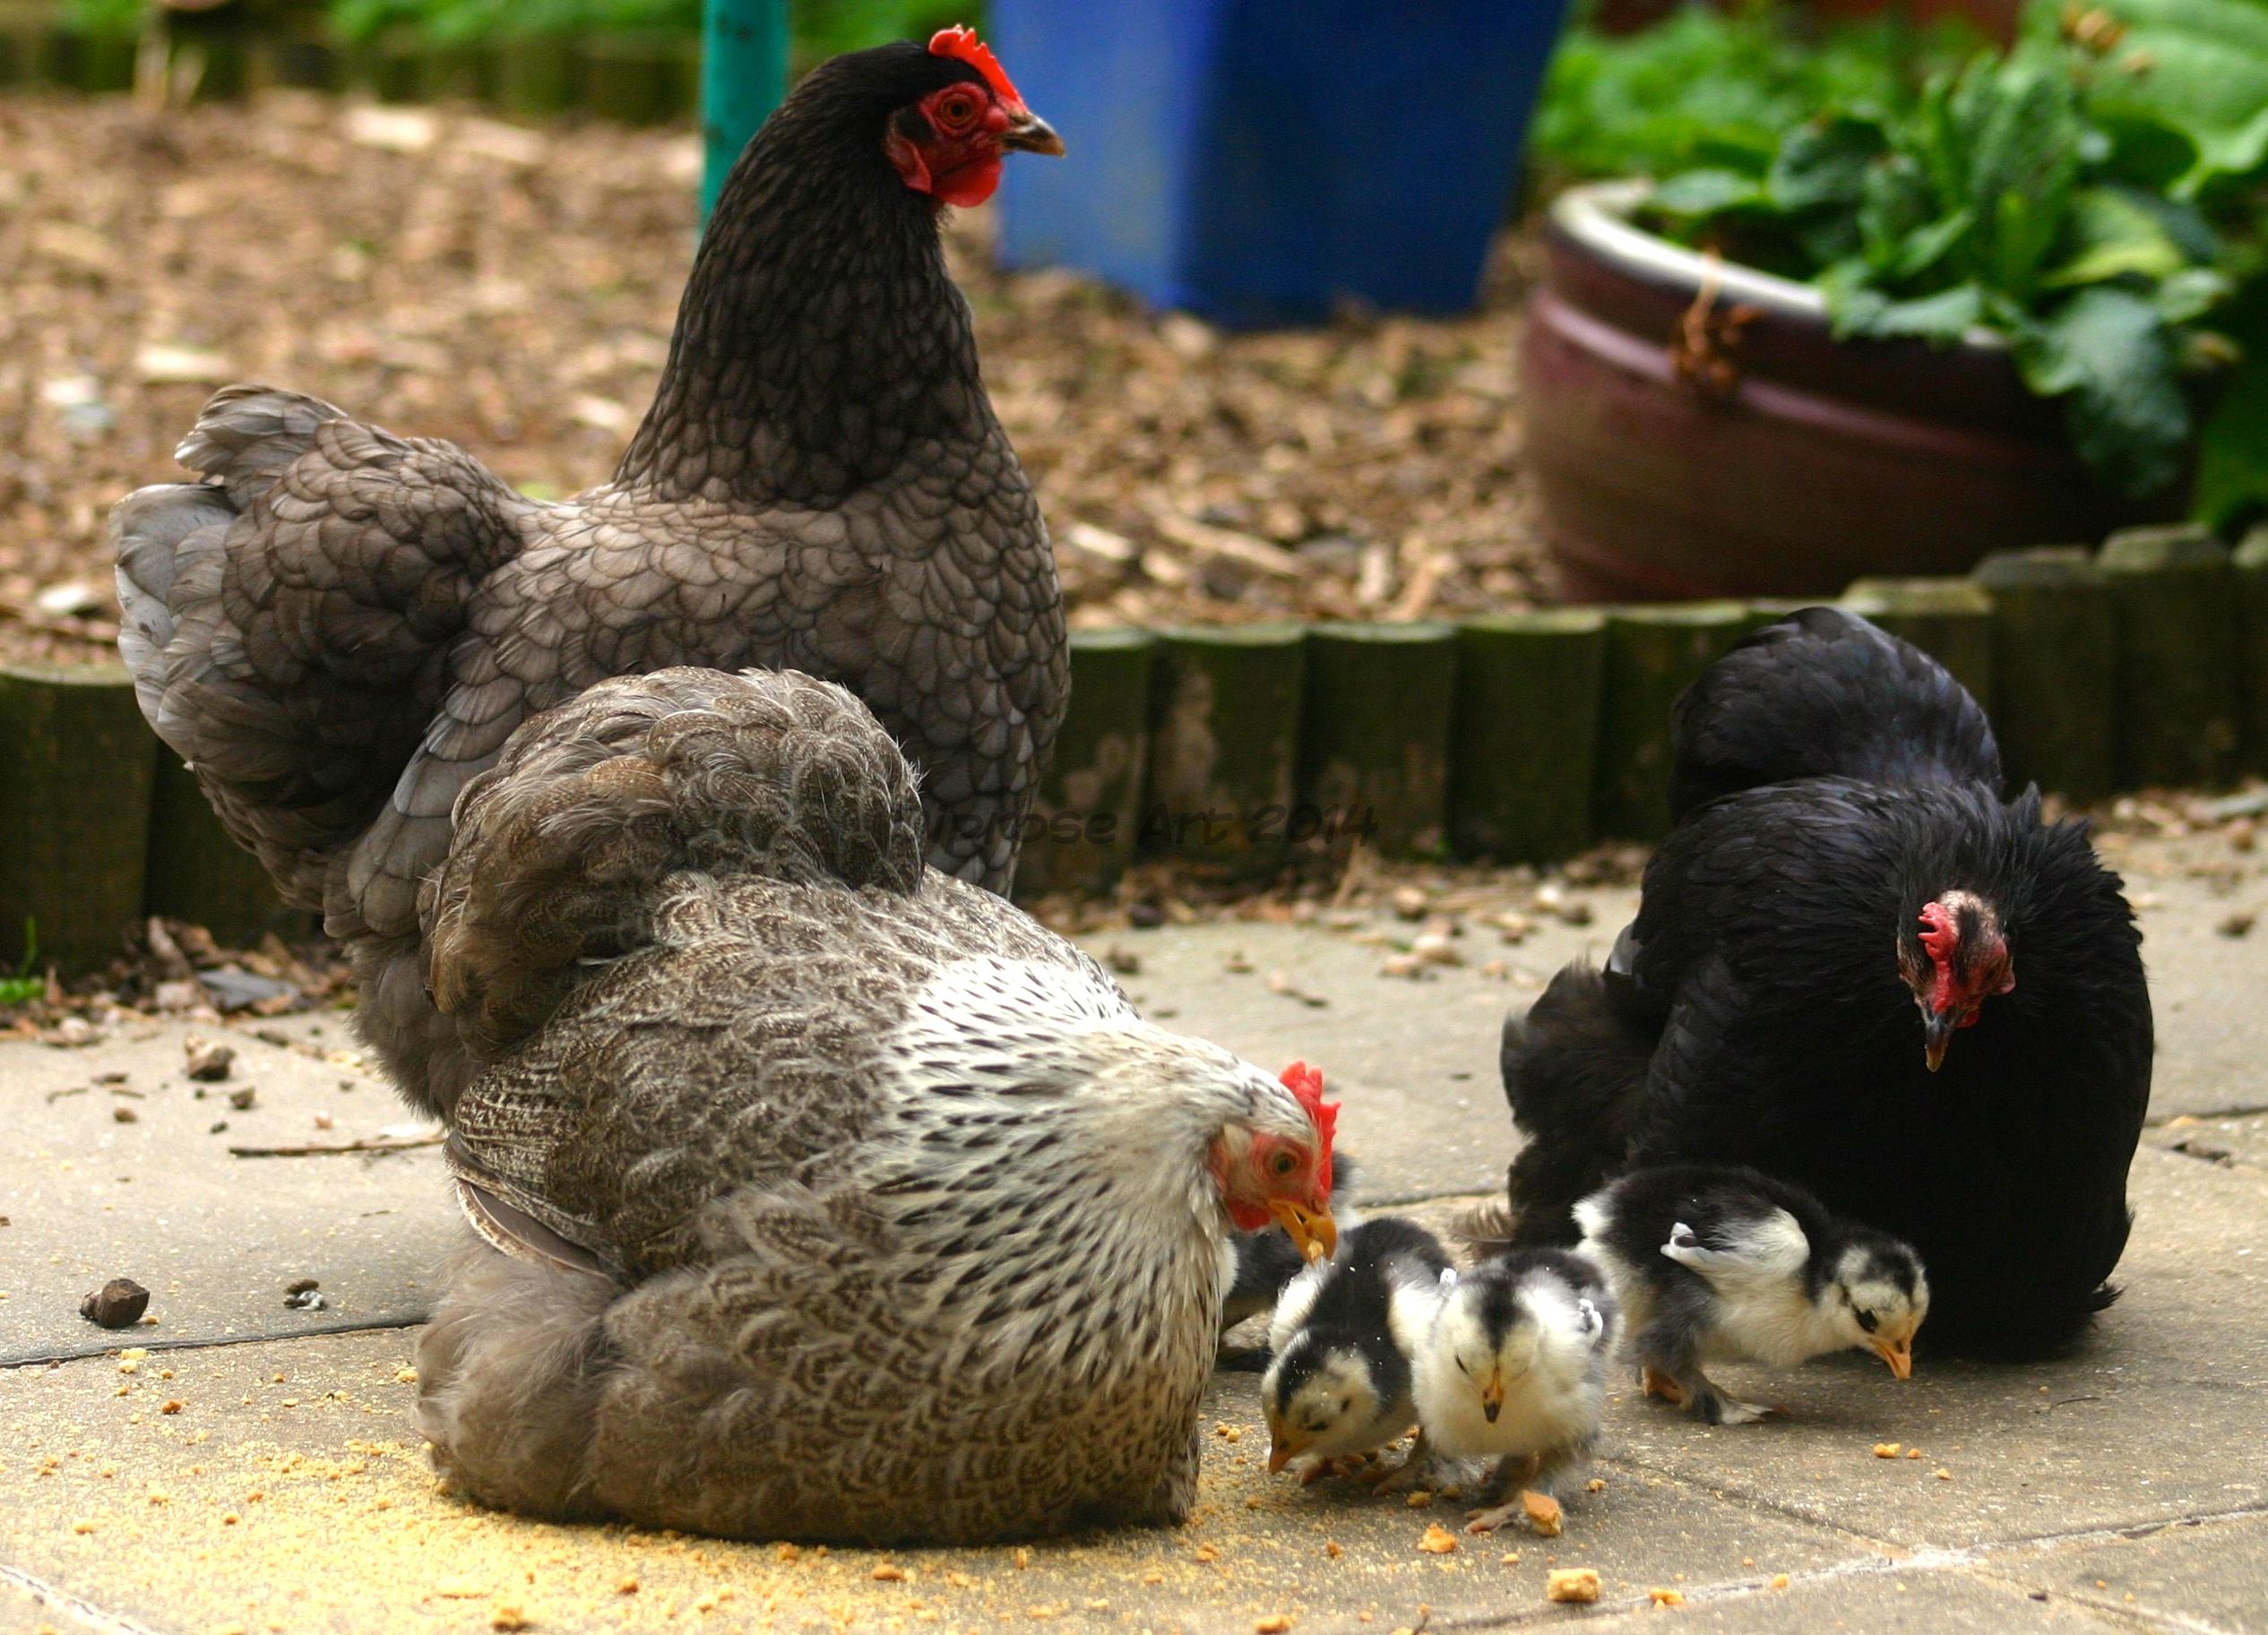 I loved these portly little bantam hens - like fussy tea cosies